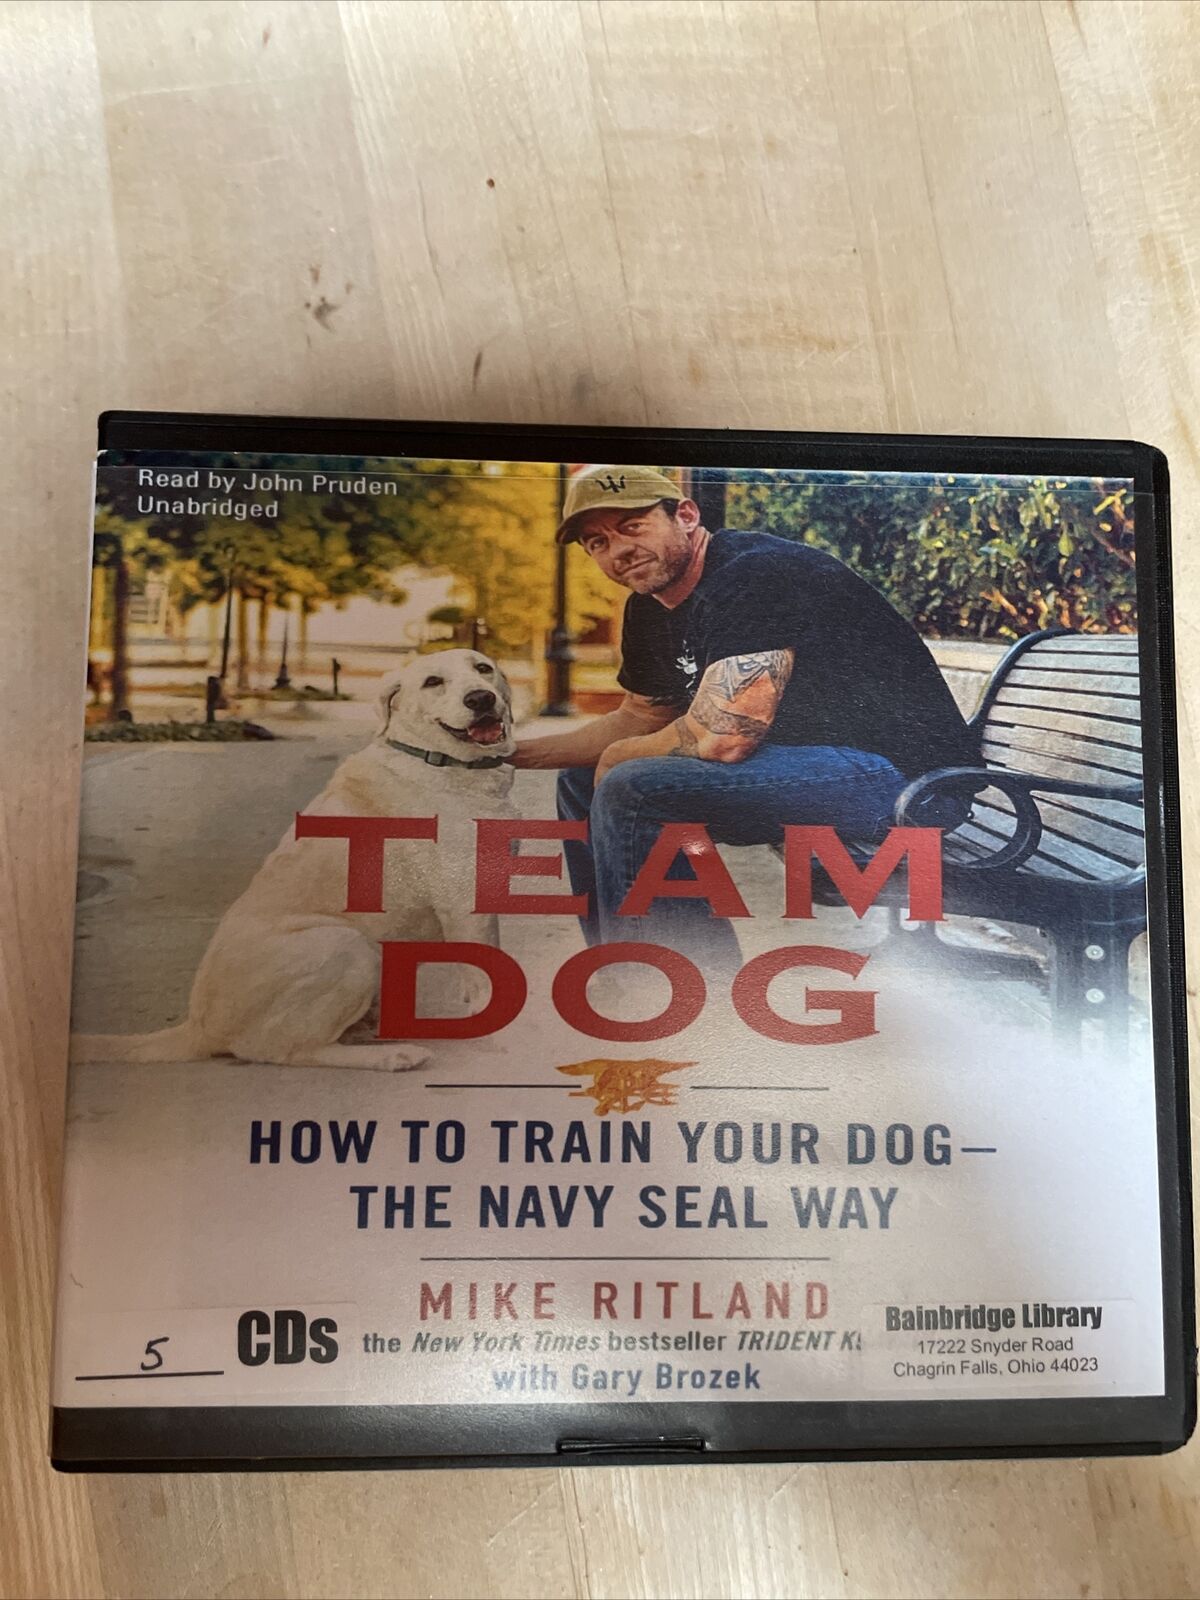 Dog Training Cd’s, Team Dog, How To Train Your Dog The Navy Seal Way